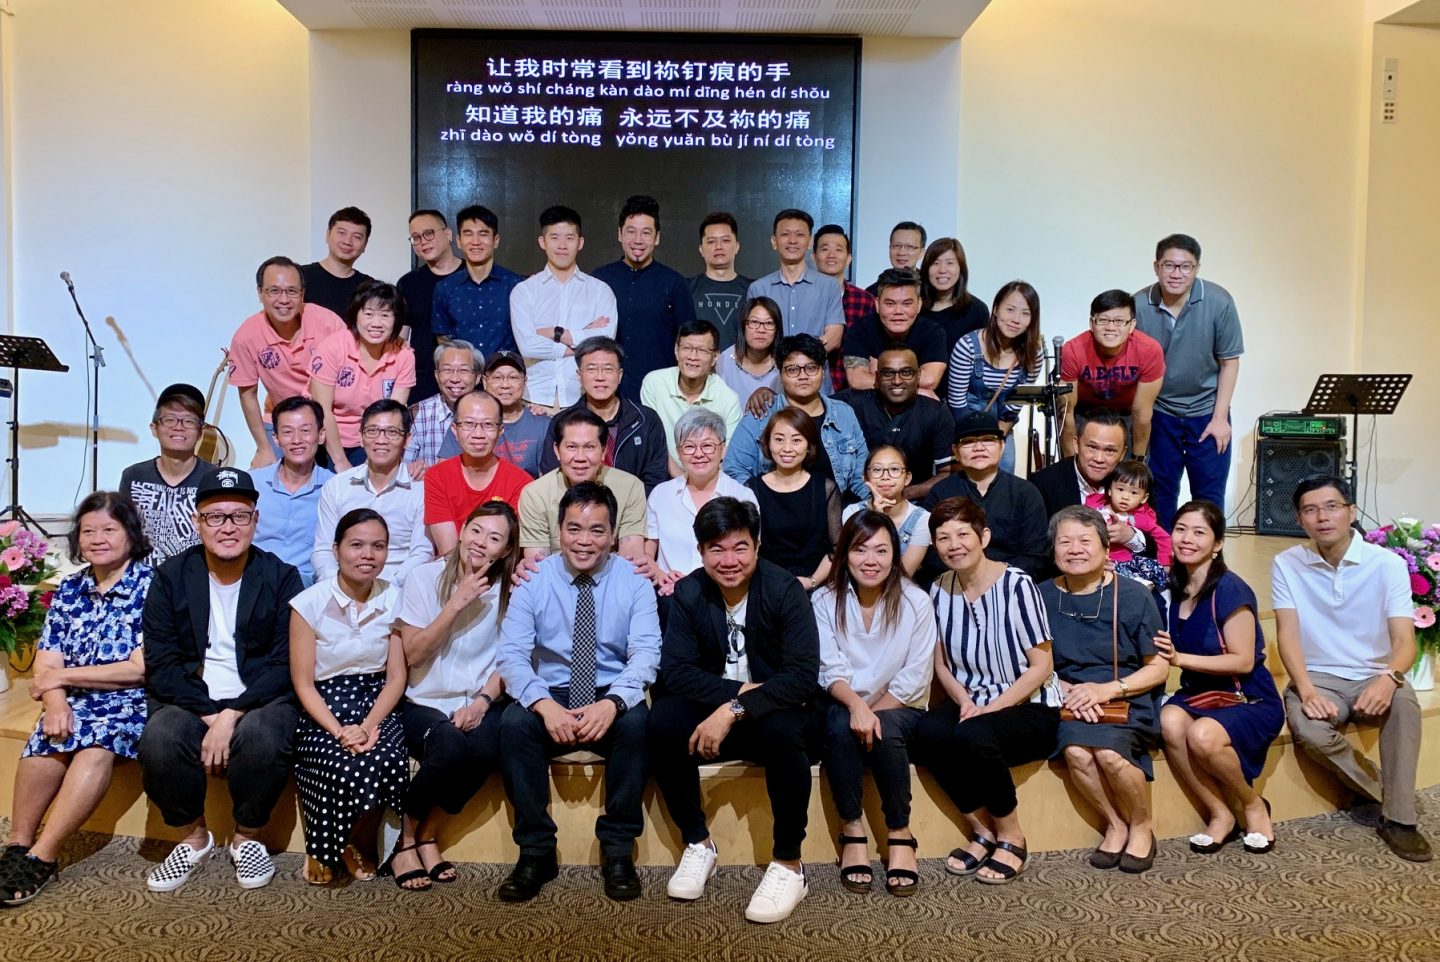 Pastor Joshua (first row, fifth from left) and members of the New Life Group at WEFC. Operating on the principle of unconditional love, he leaves it open to members to choose whether or not to disclose their pasts. But there is a sense of shared ownership where even the families of inmates are supported so that no one goes through the difficult season alone. NLG members are also integrated into the larger church body because they do not want to perpetuate stereotypes and allow feelings of discrimination to fester. 